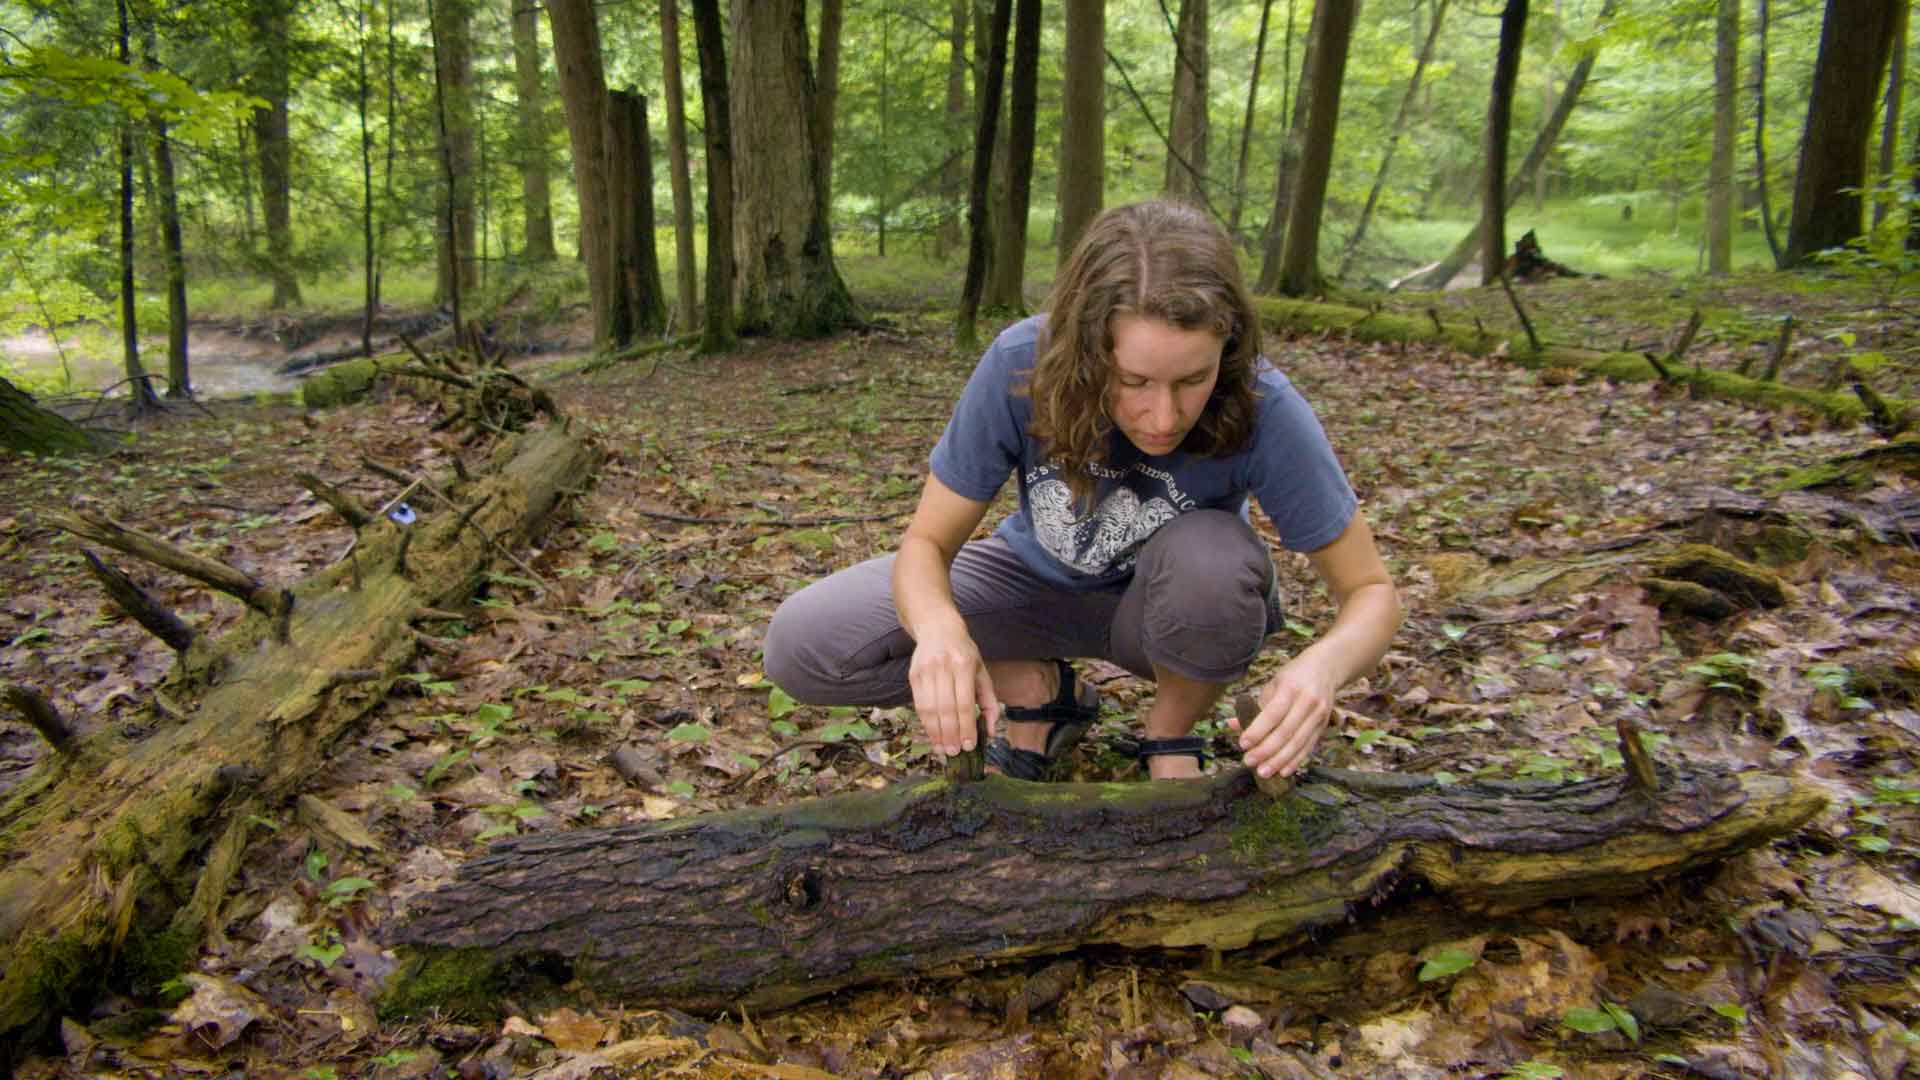 young woman turning over a log in the woods to look underneath